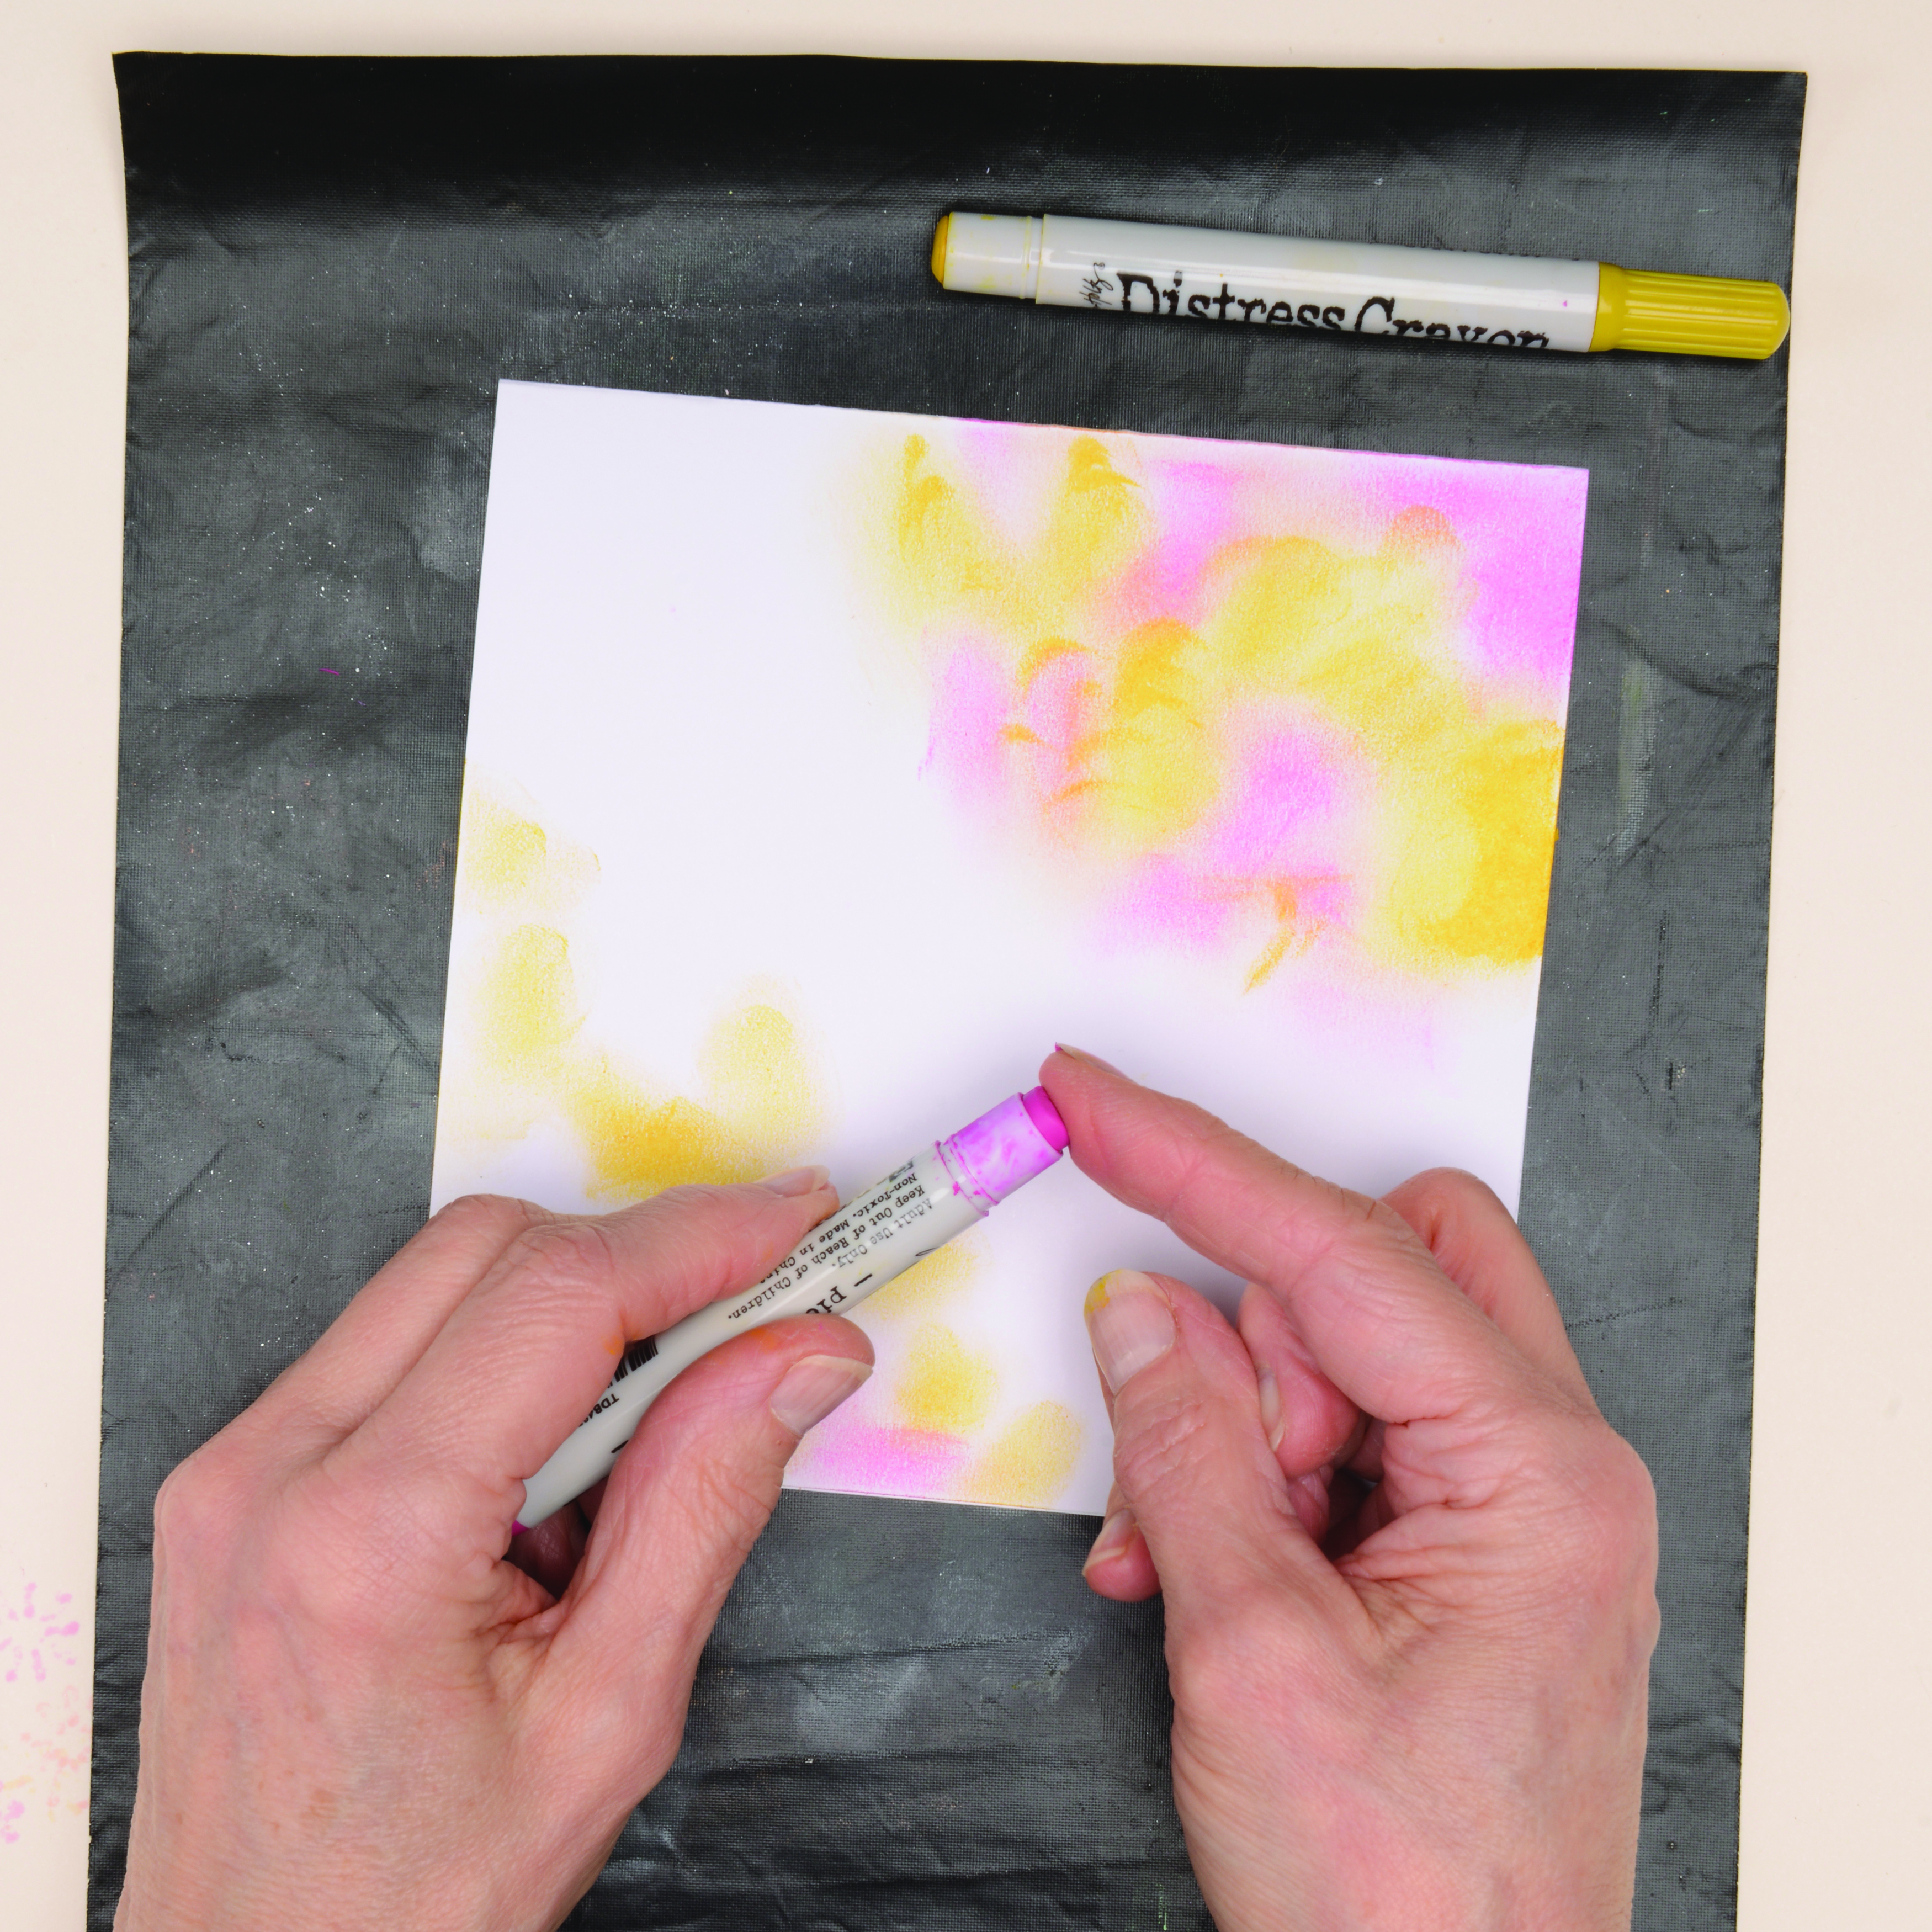 How to use Tim Holtz Distress Crayons – step 1